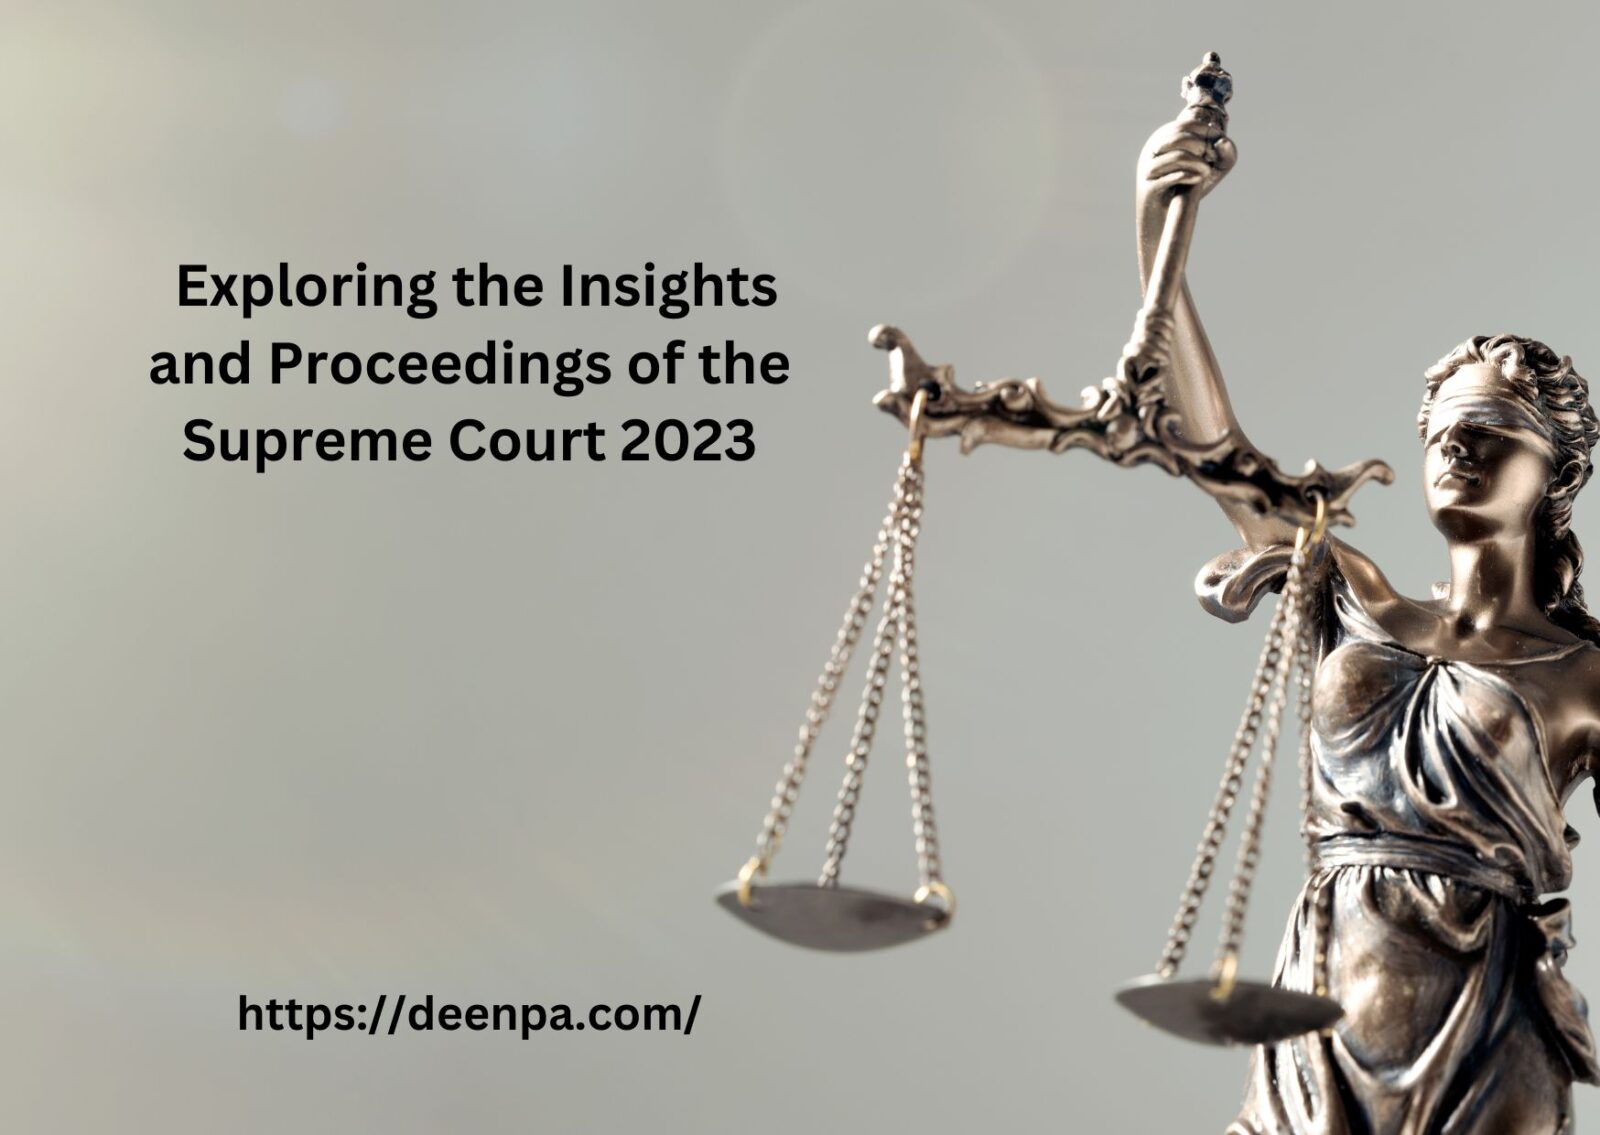 Exploring the Insights and Proceedings of the Supreme Court 2023